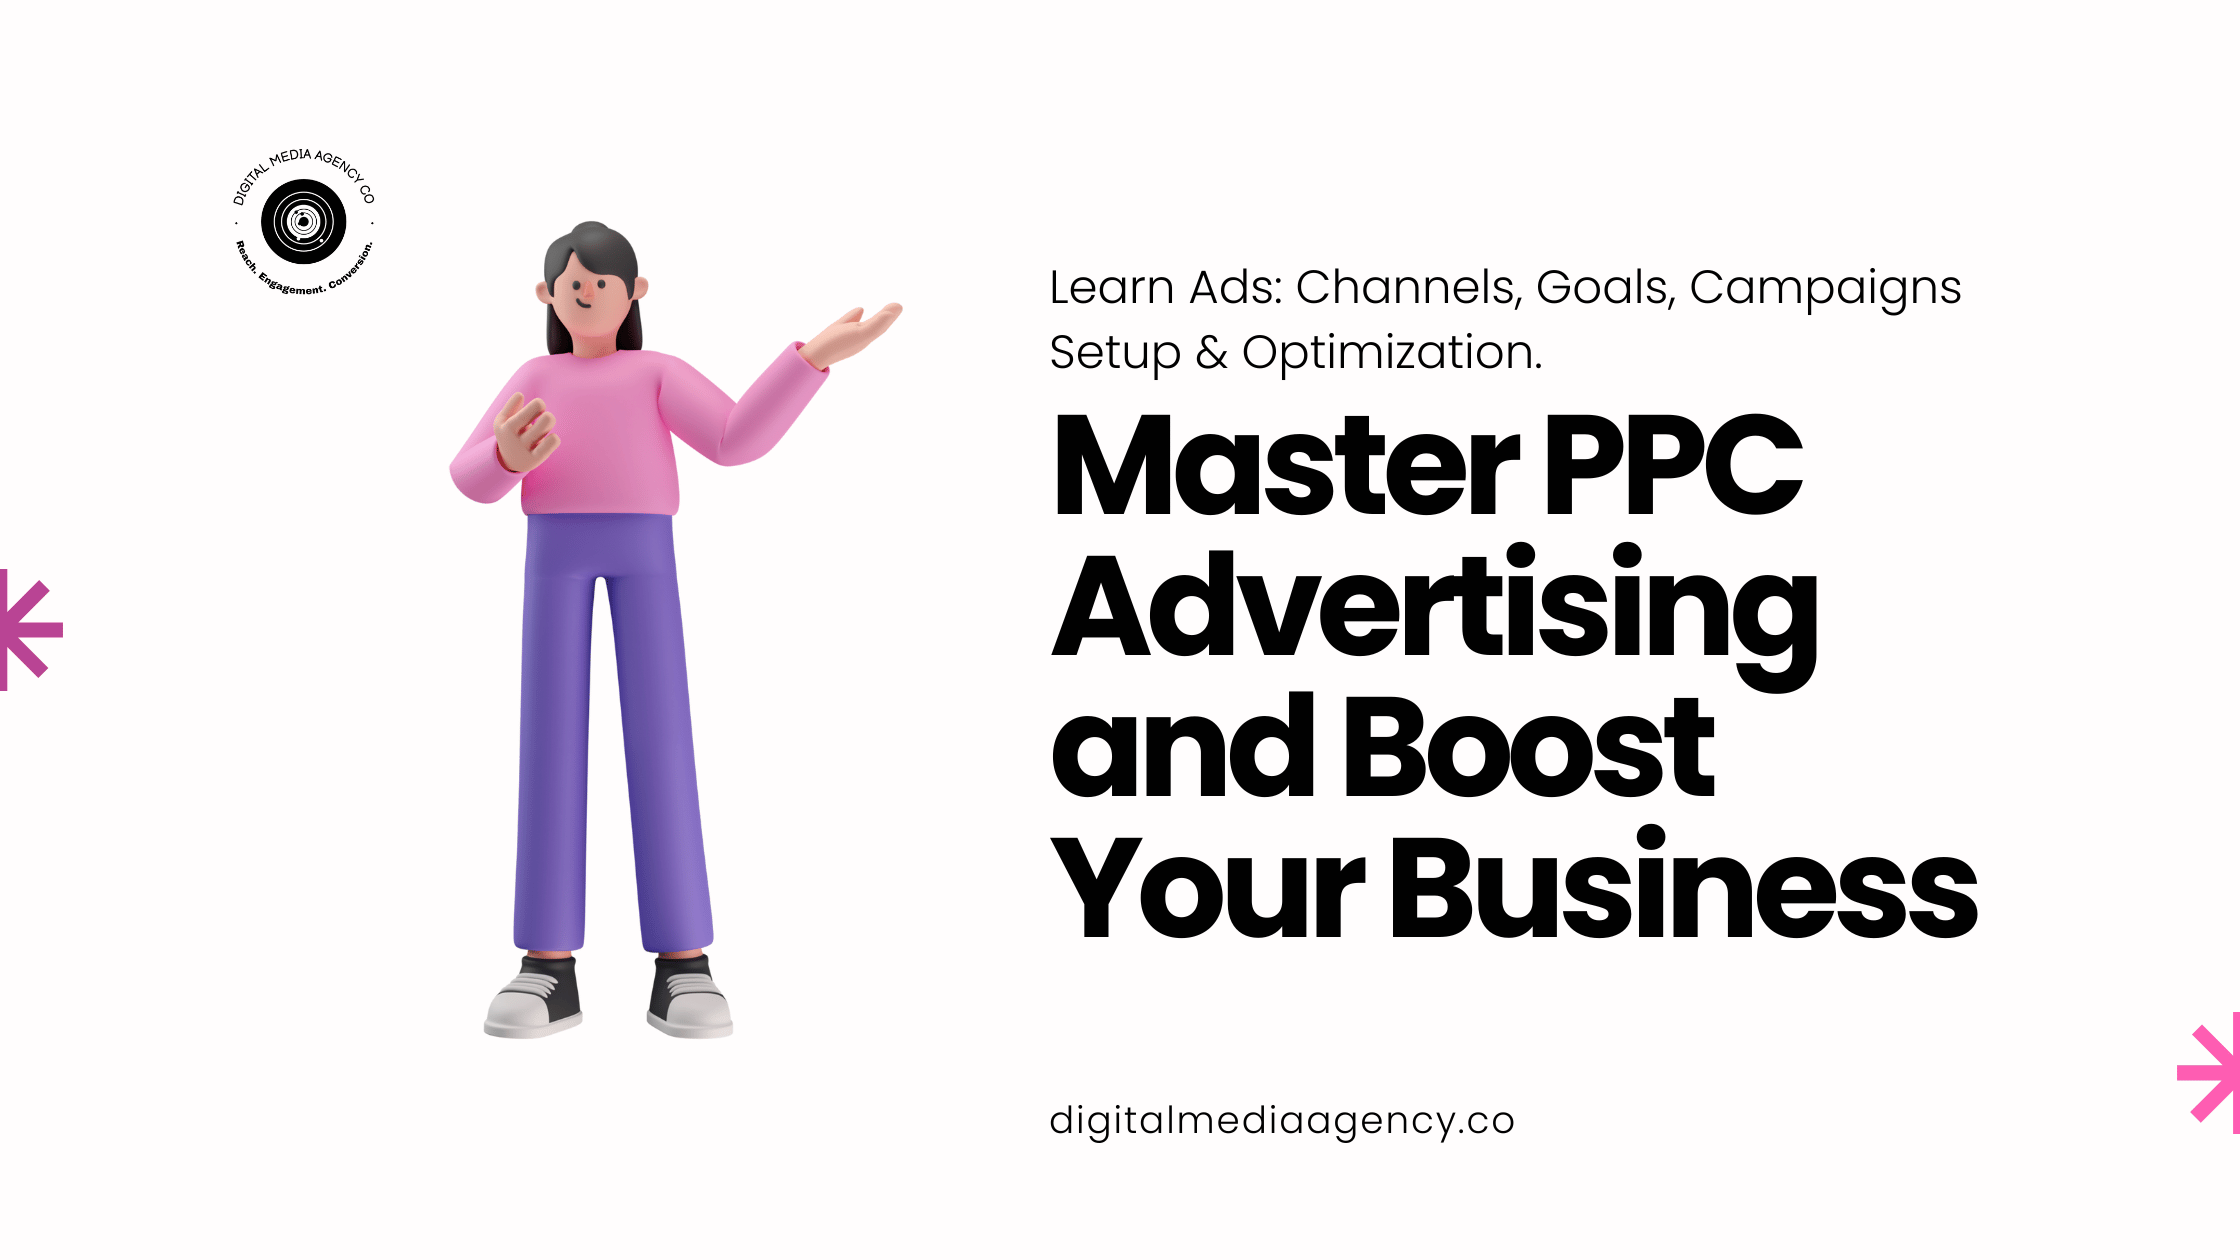 Master PPC Advertising and Boost Your Business